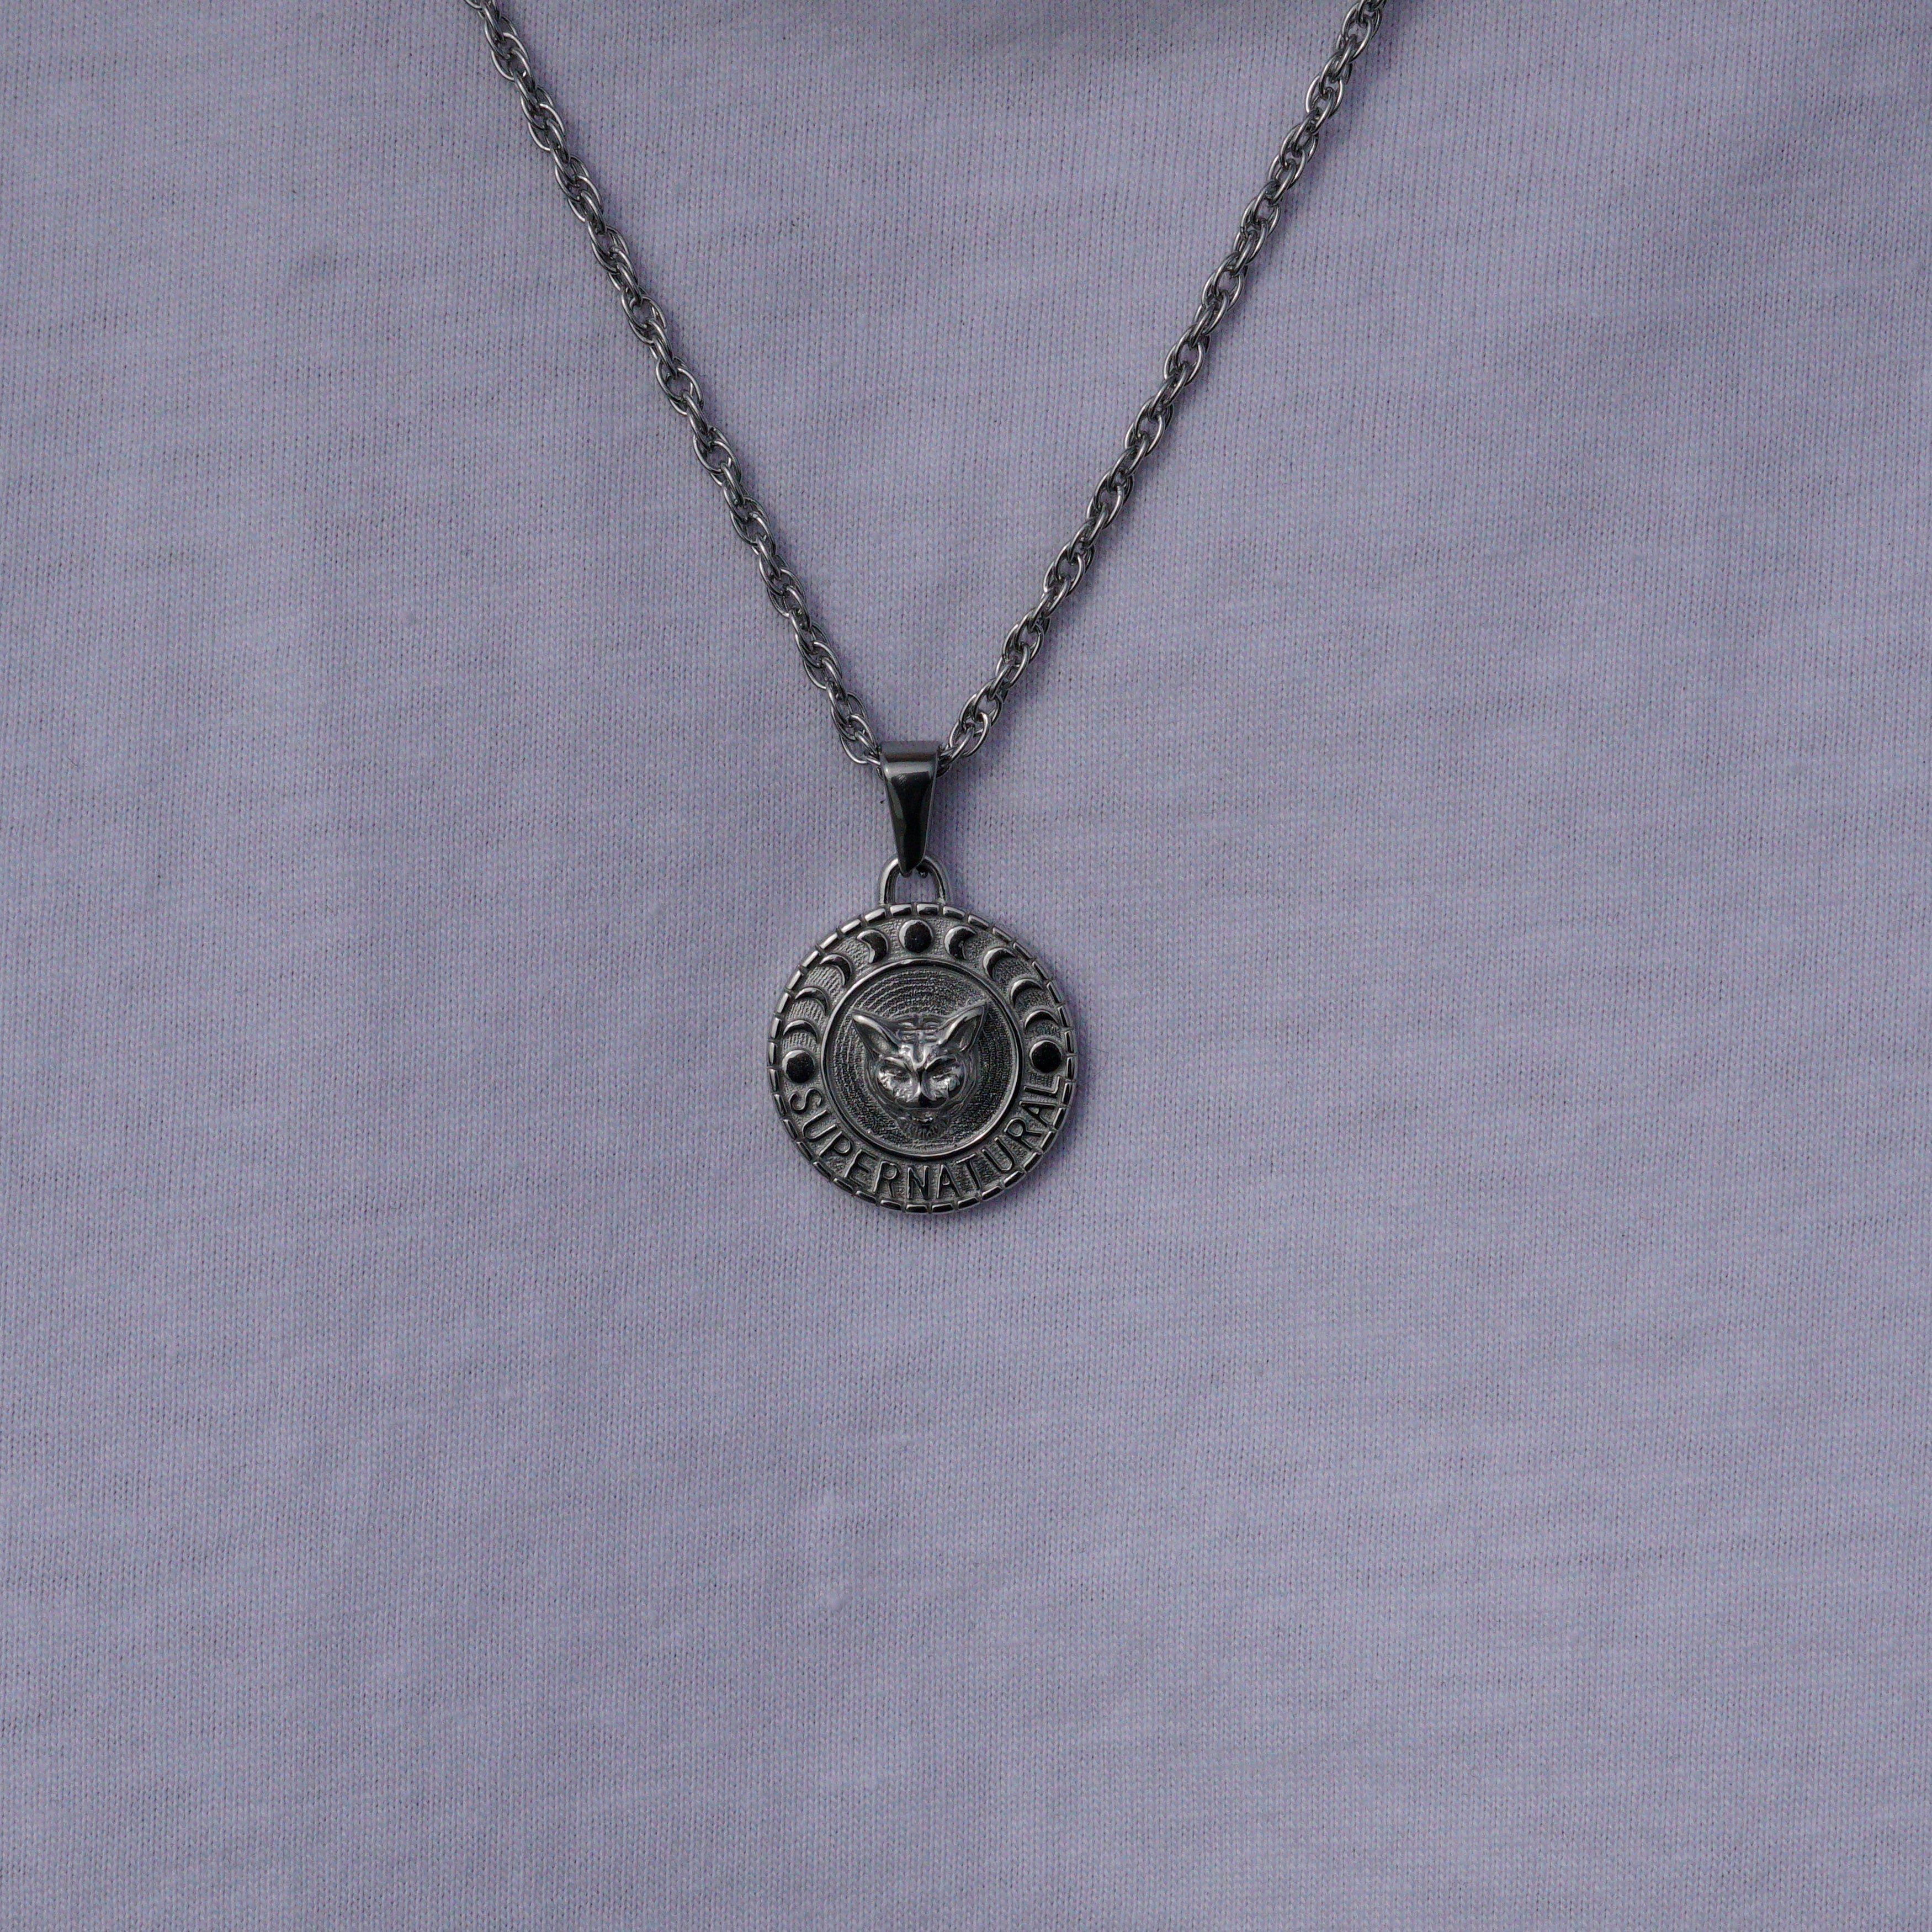 SUPERNATURAL NECKLACE - SILVER TONE